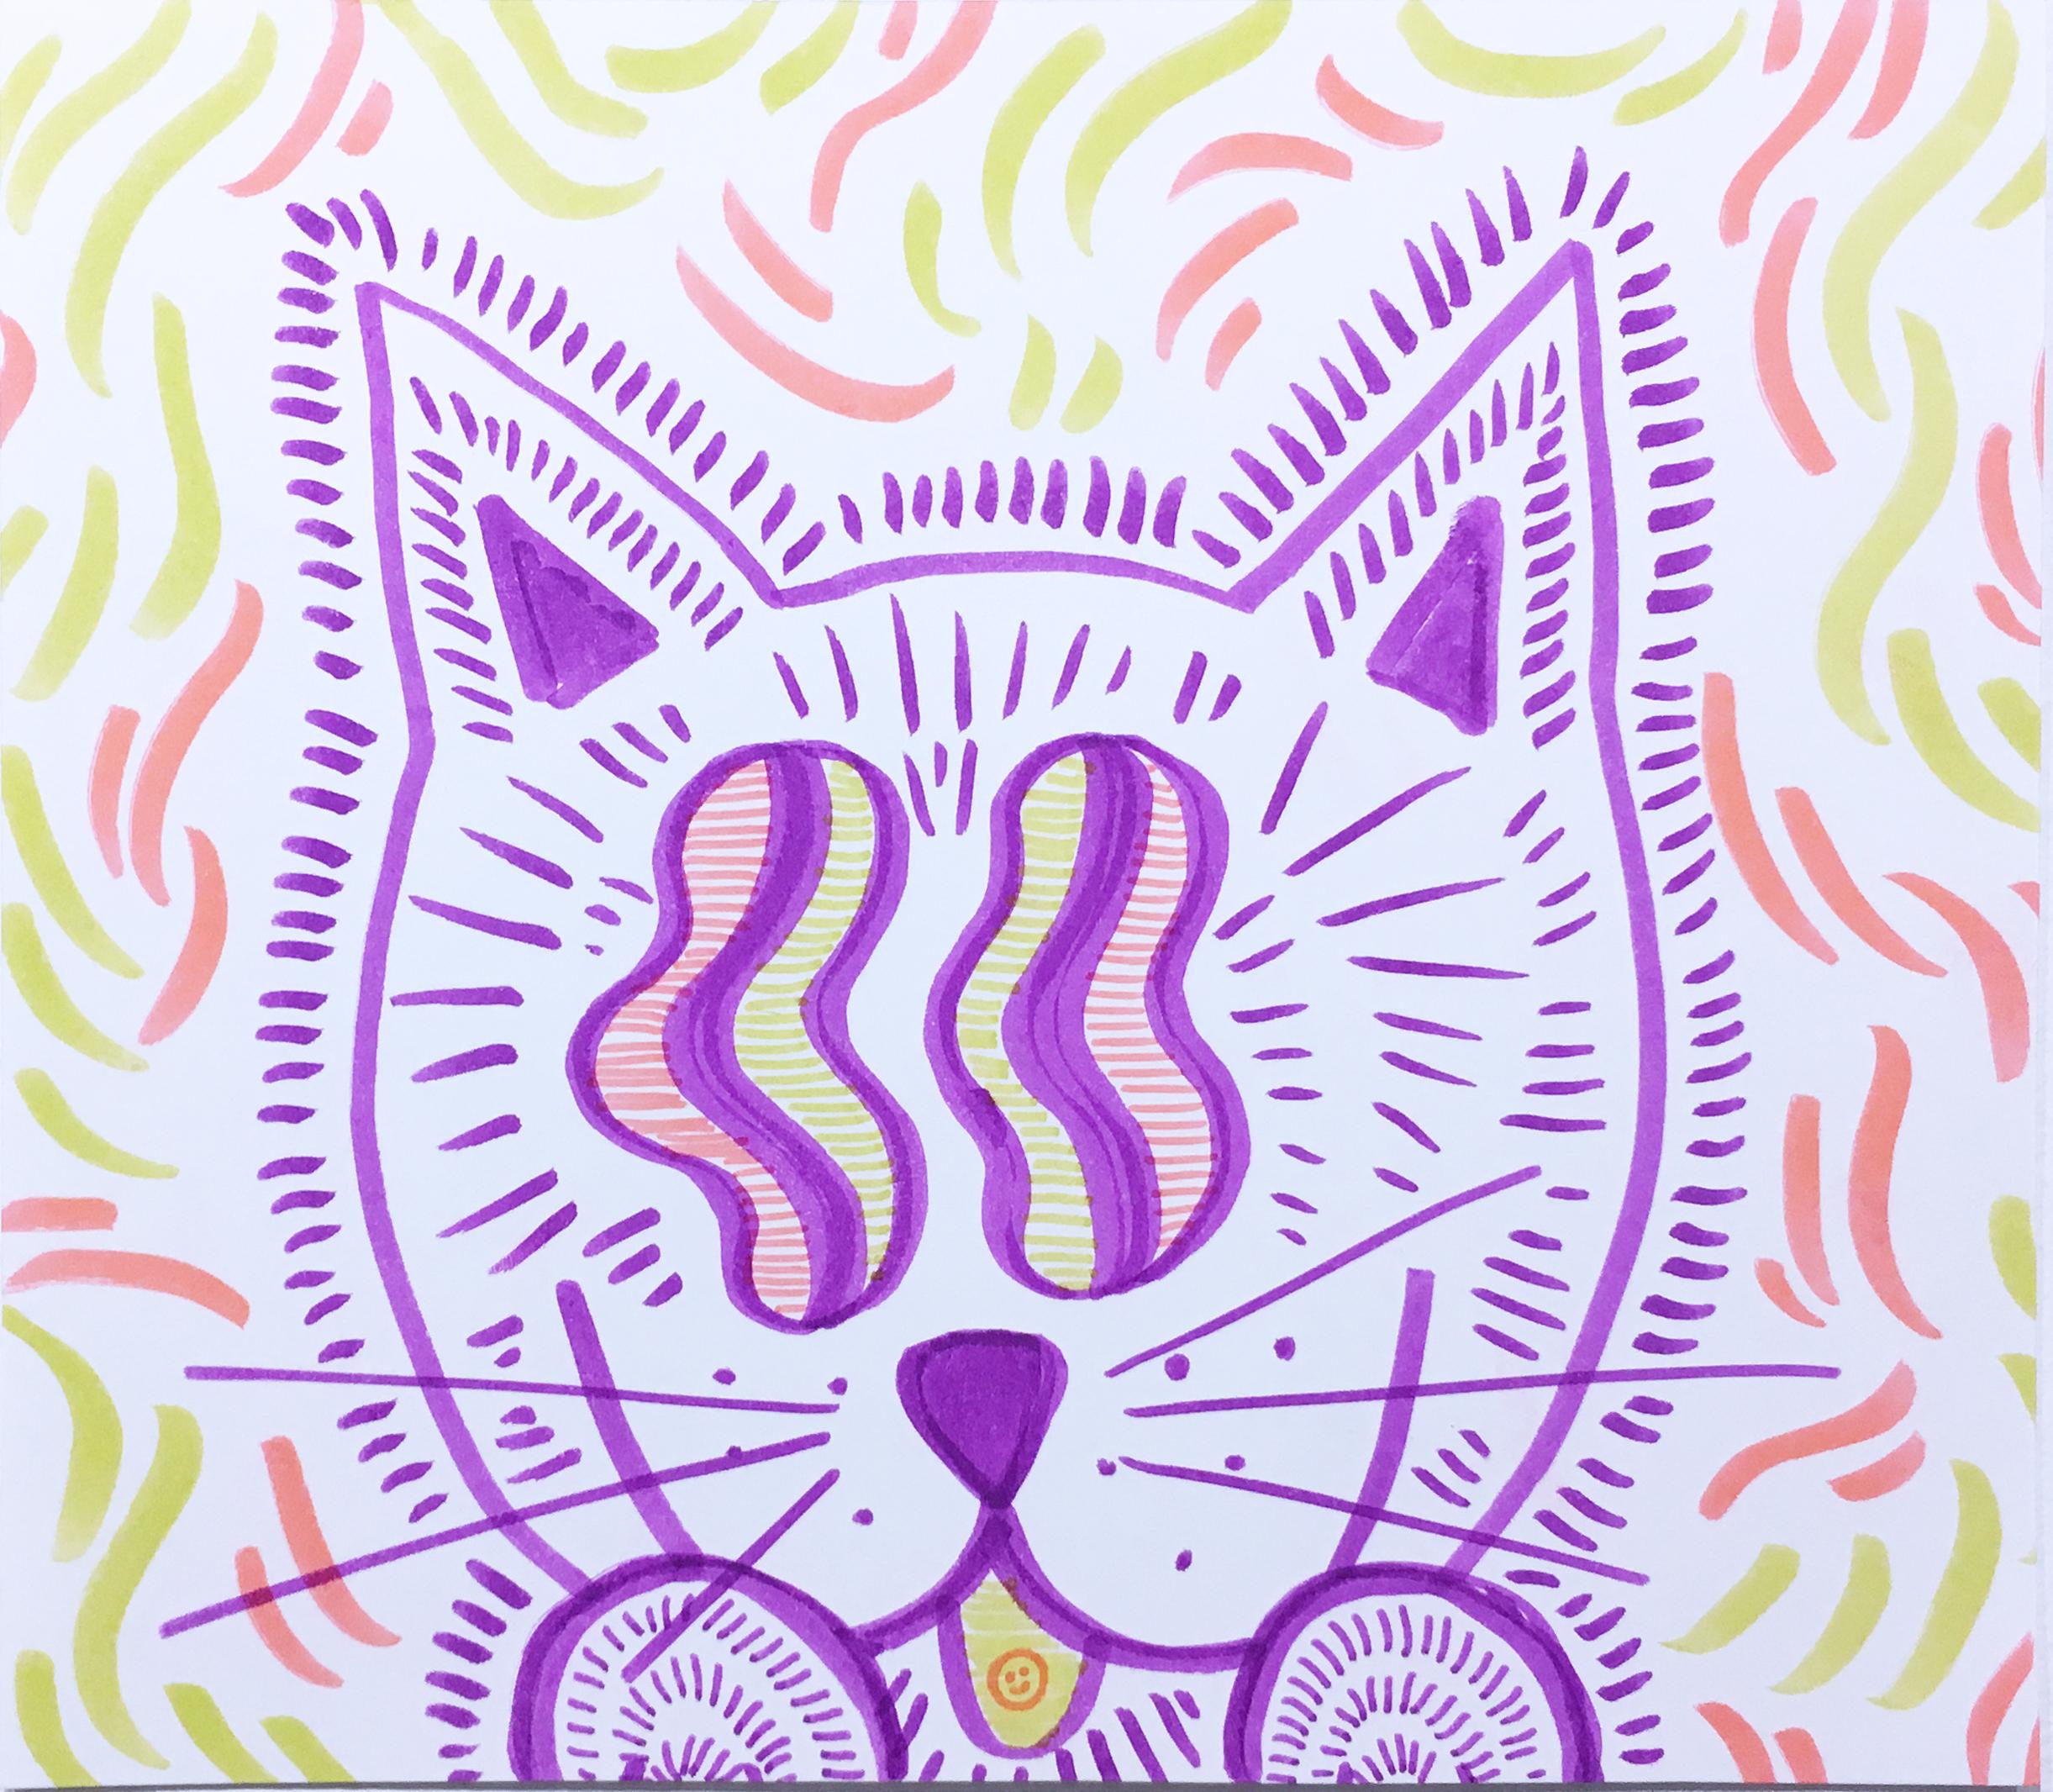 Bonus Kitty, Watercolor Paper Drawing, Pop Art, Cat with Graphic Wavy Pattern